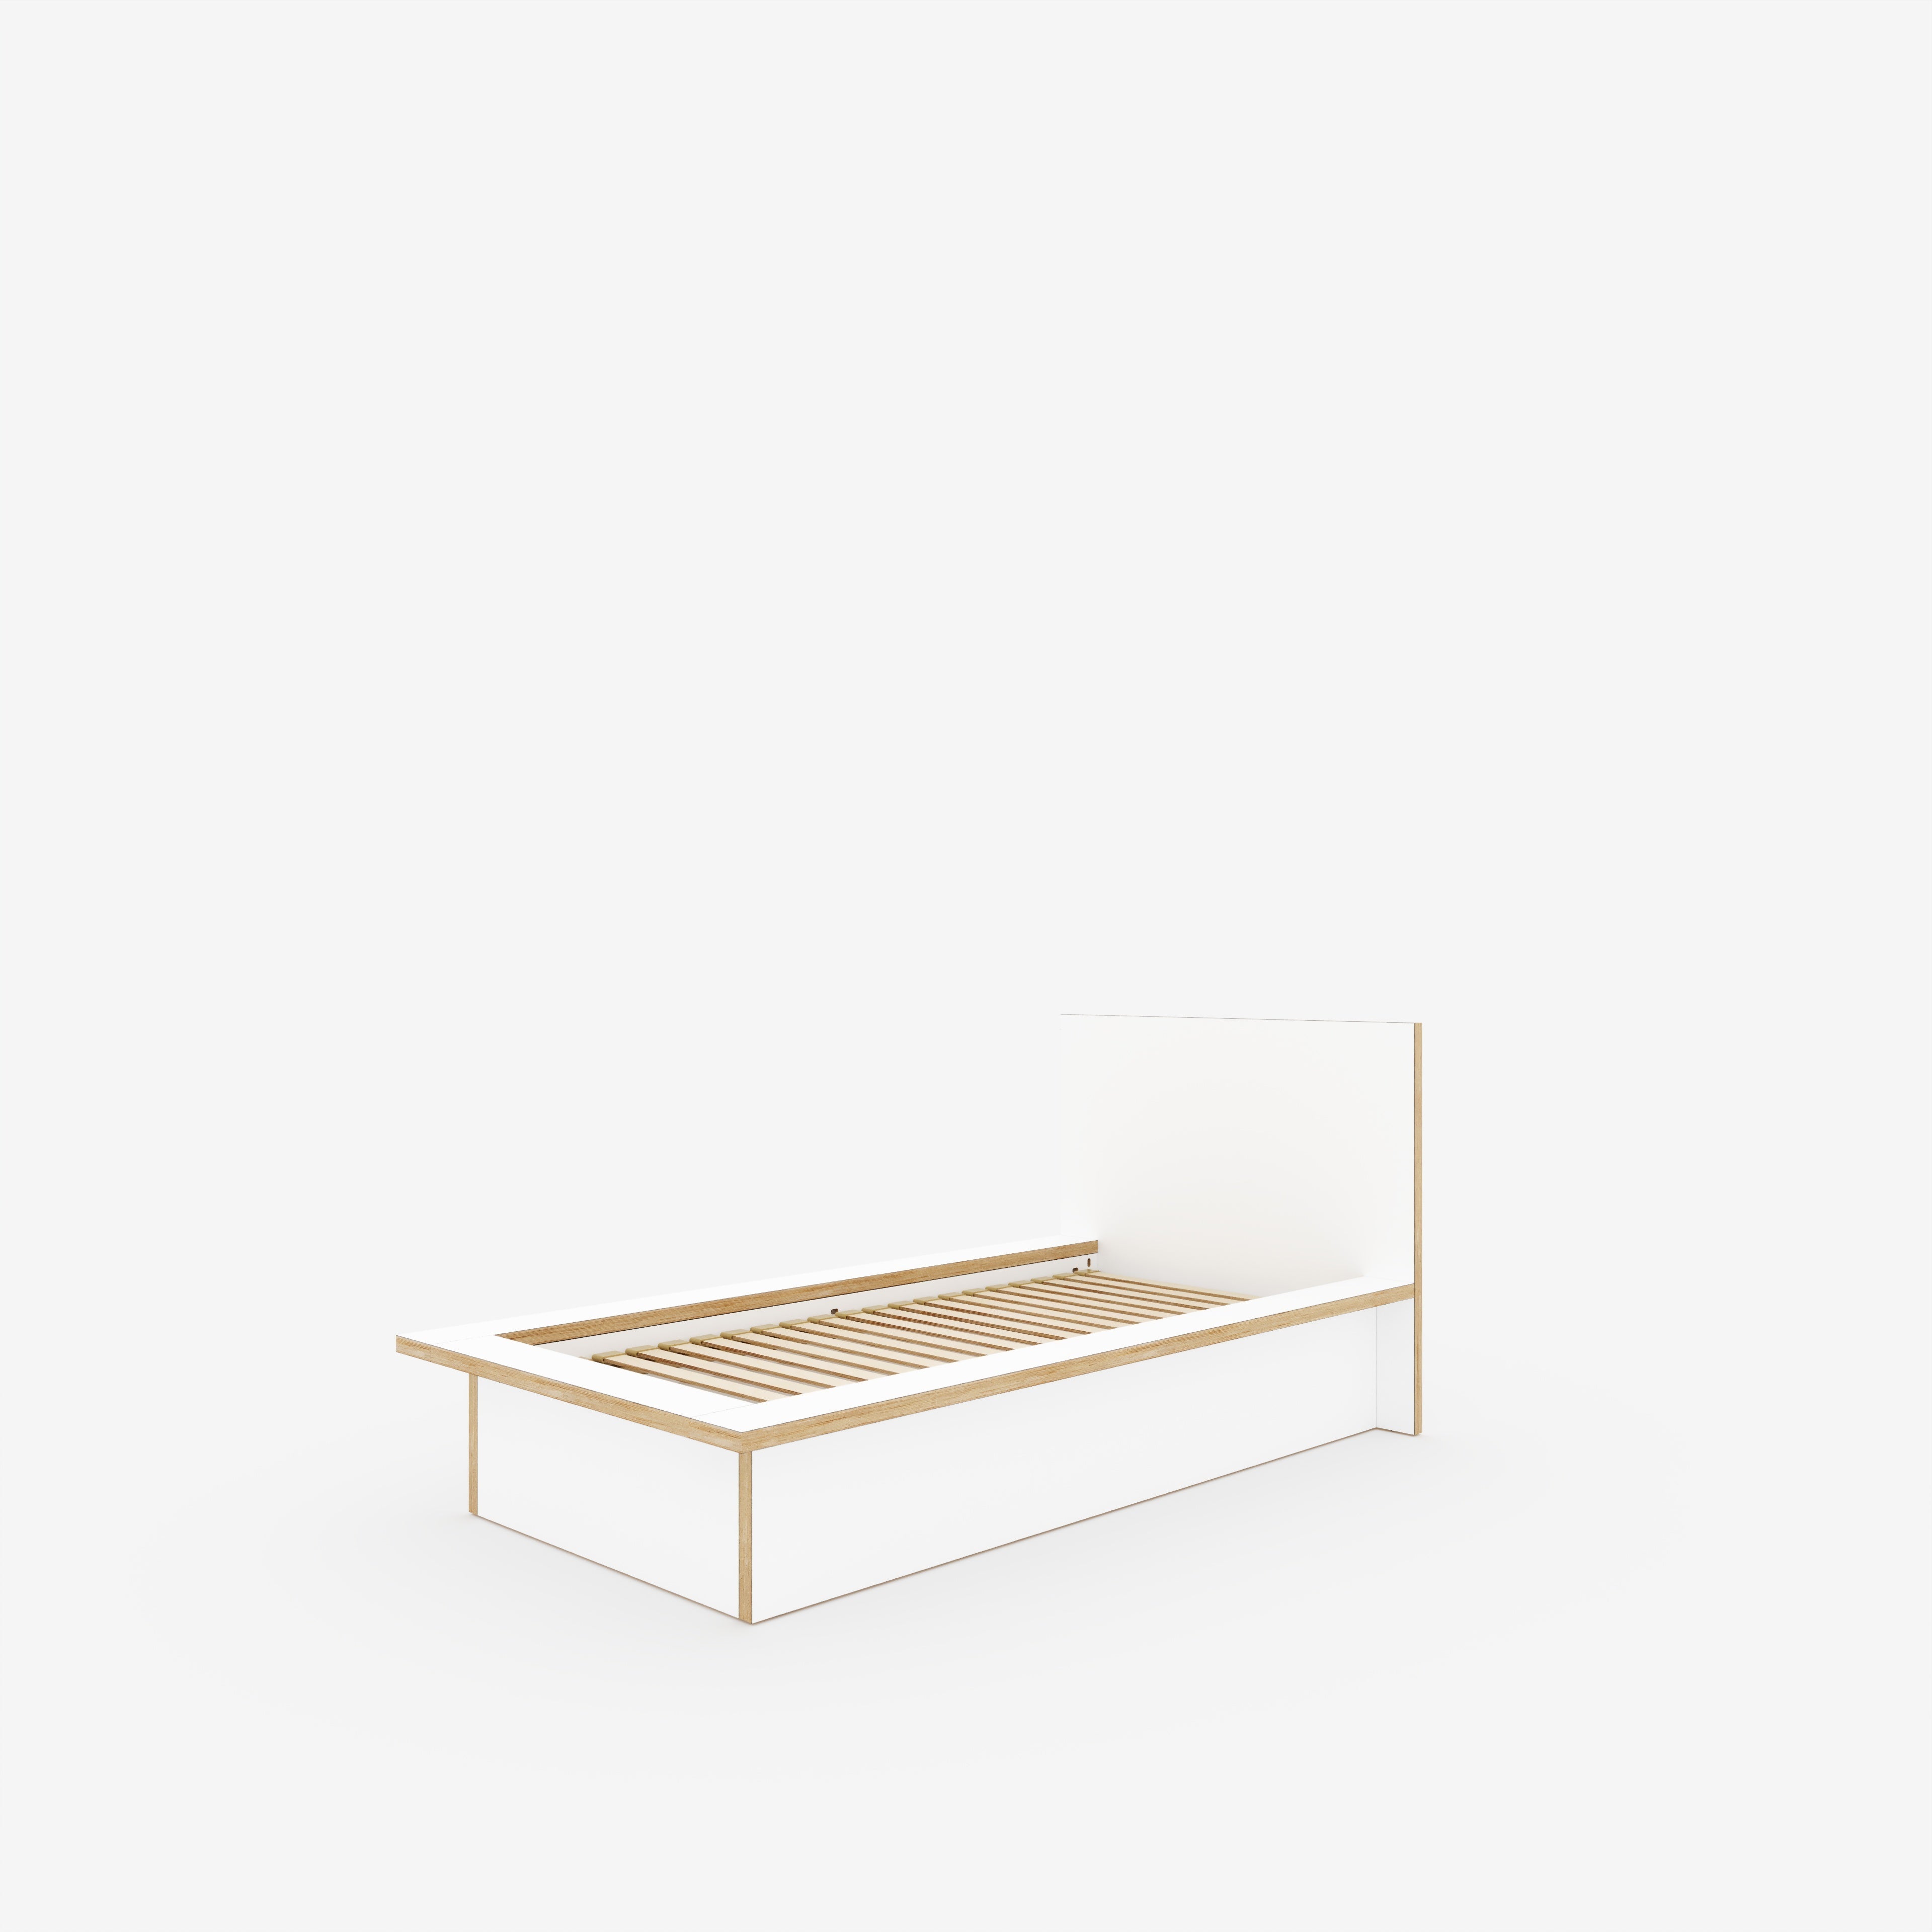 Plywood Platform Bed - Plywood Formica White - European Single 900(w) x 2000(d) High